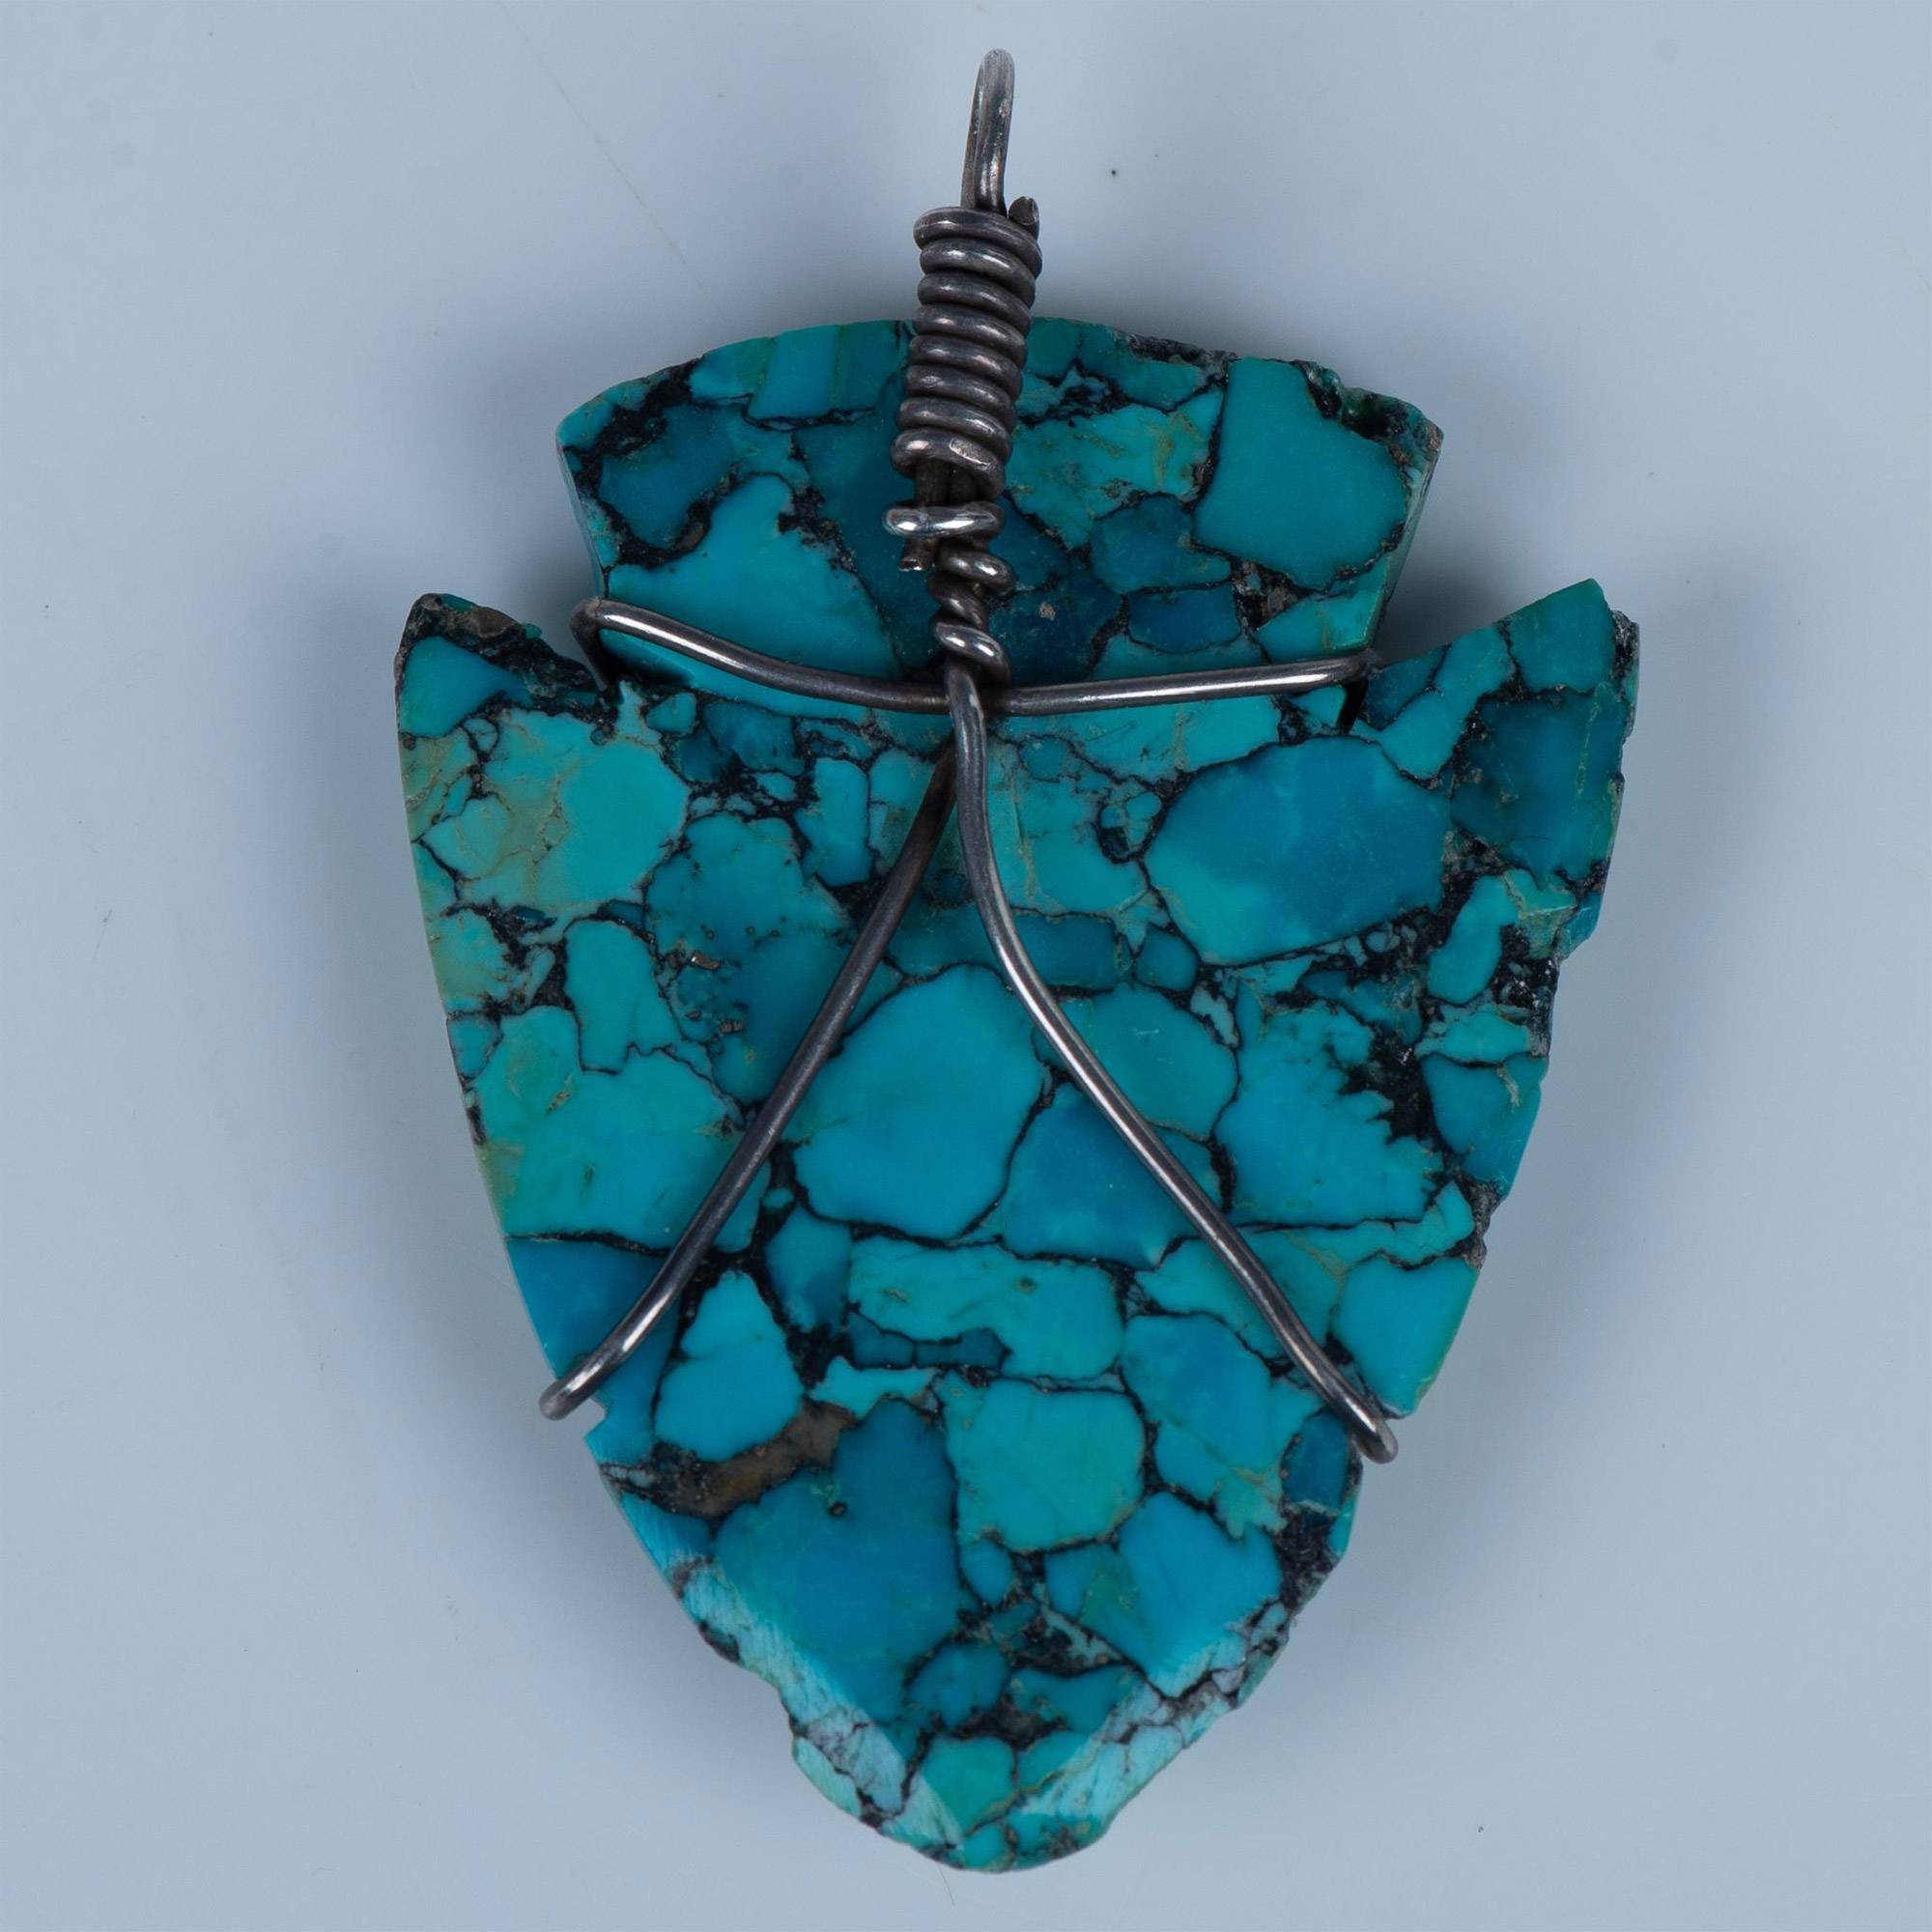 Southwestern Carved Turquoise Arrow Head Pendant - Image 2 of 4